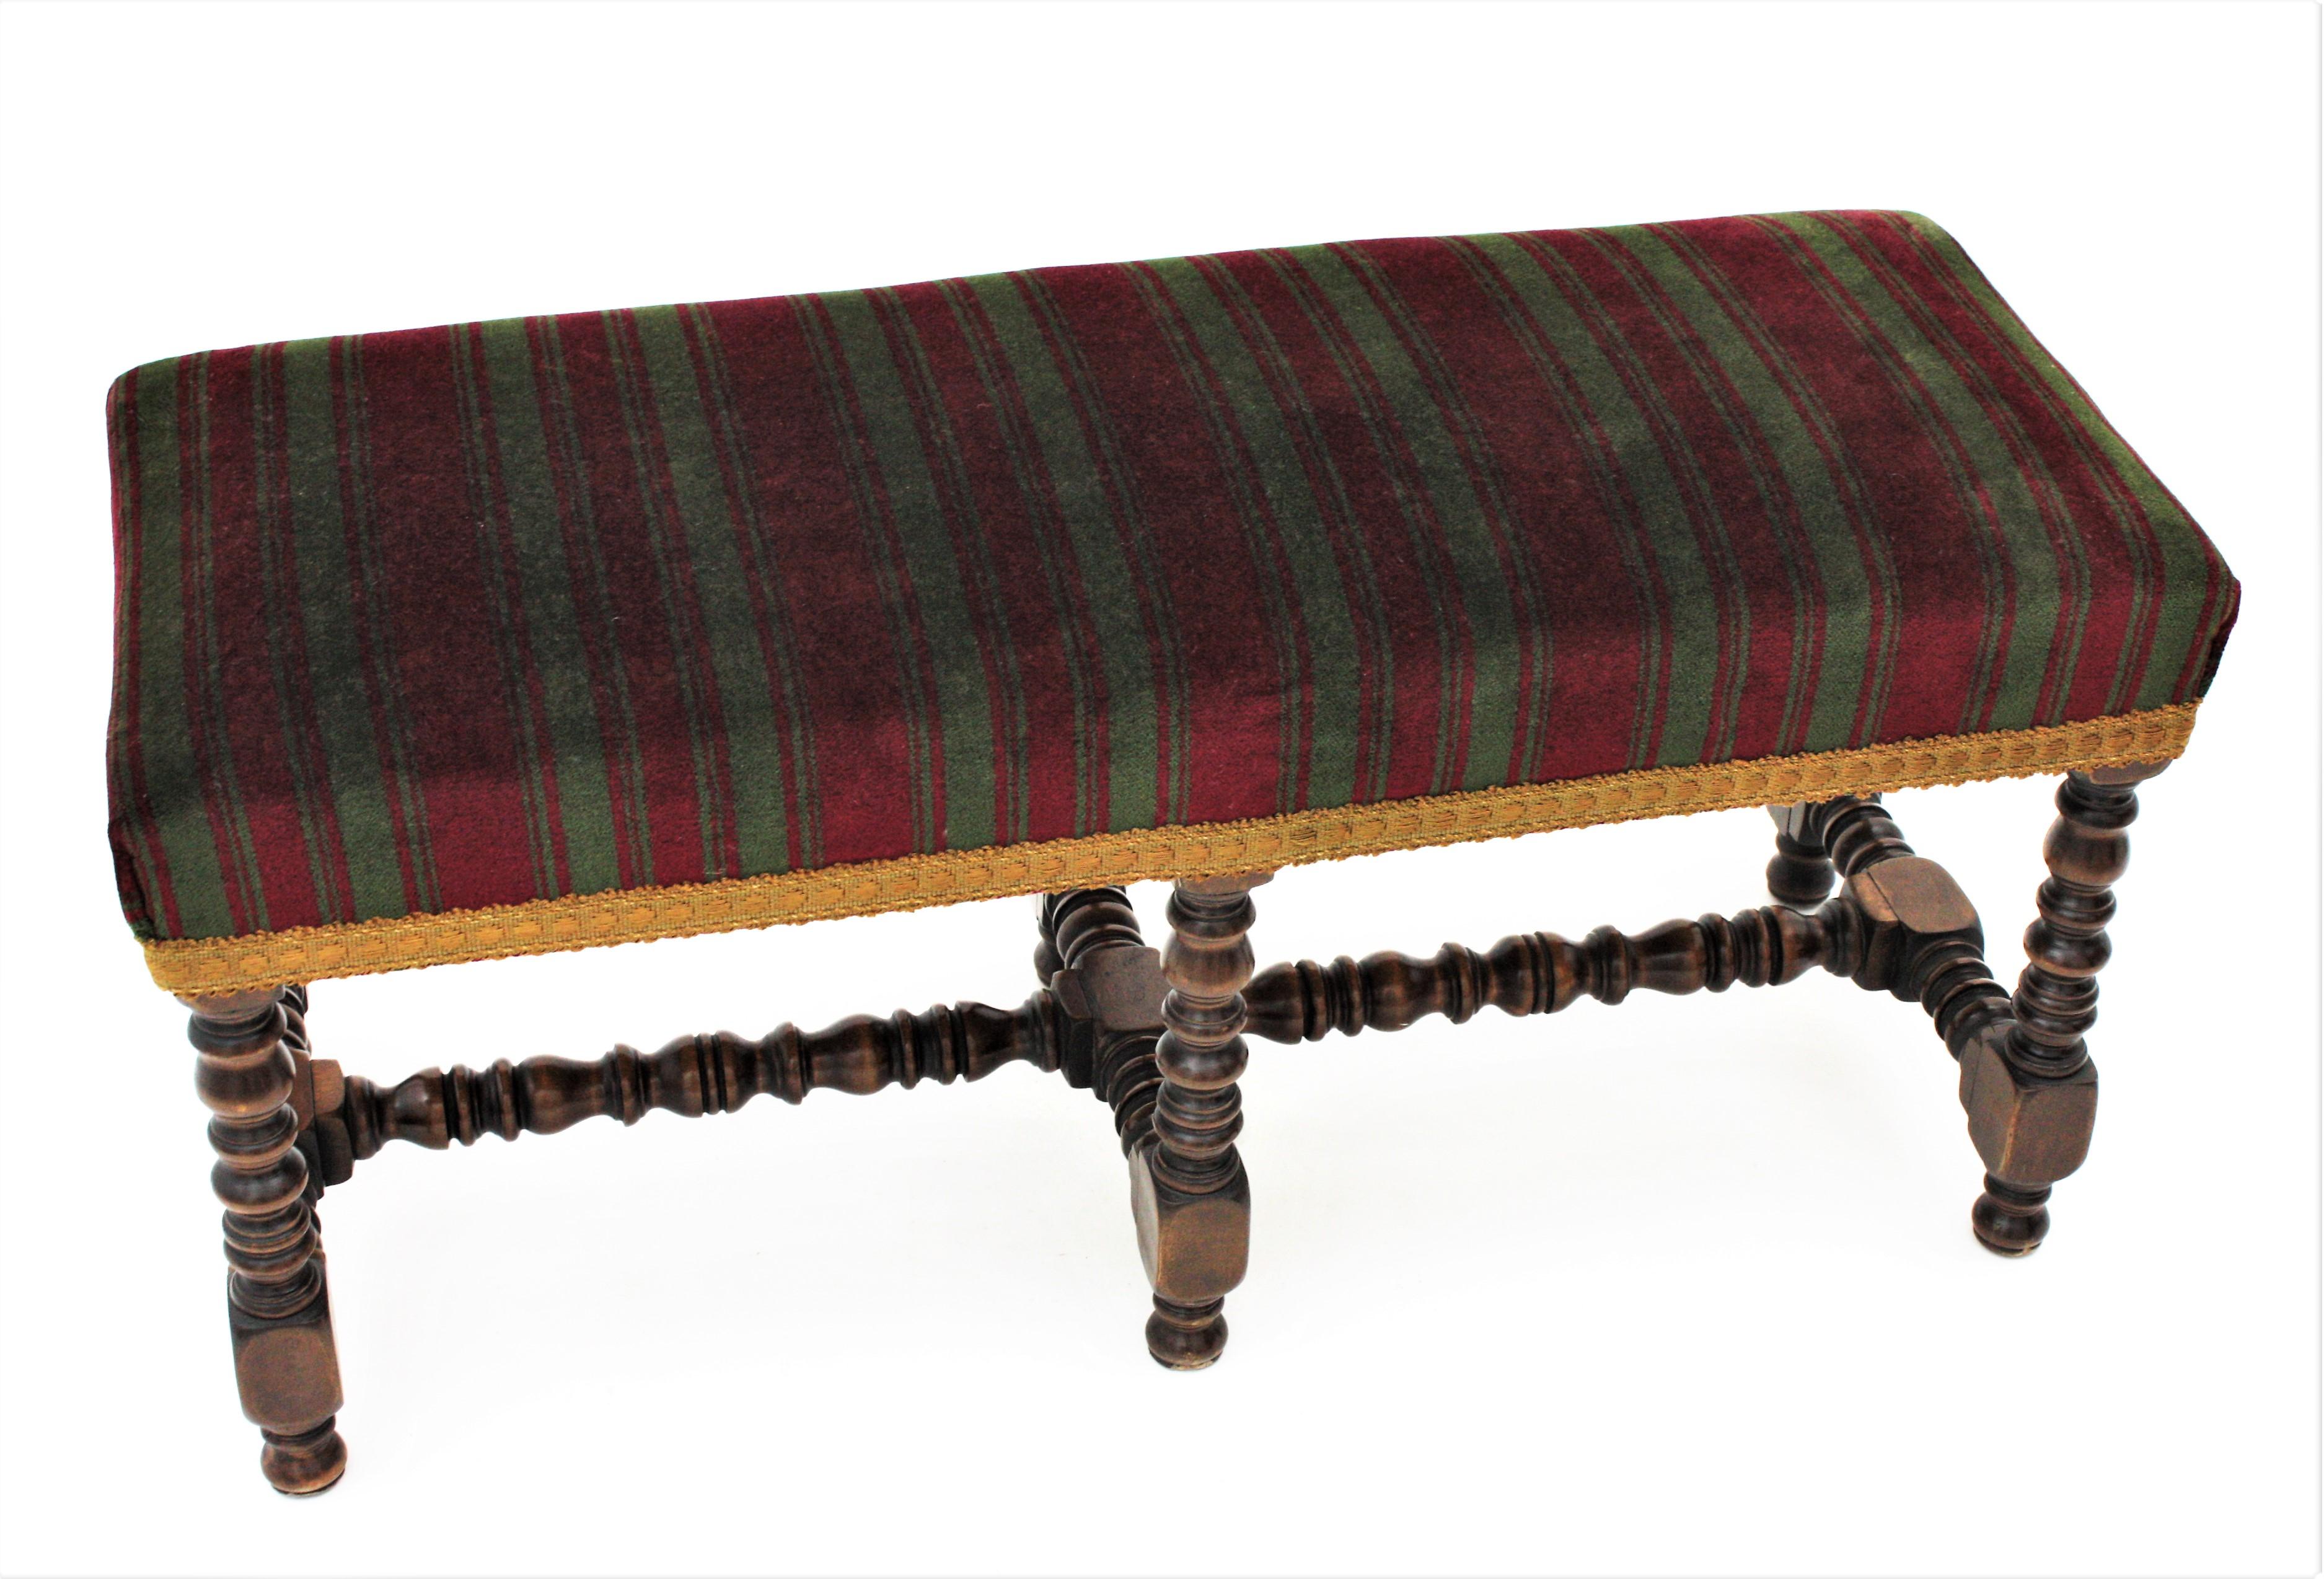 Carved Louis XIII Style Turned Wood Long Bench / Stool by Valenti, Spain 1940s For Sale